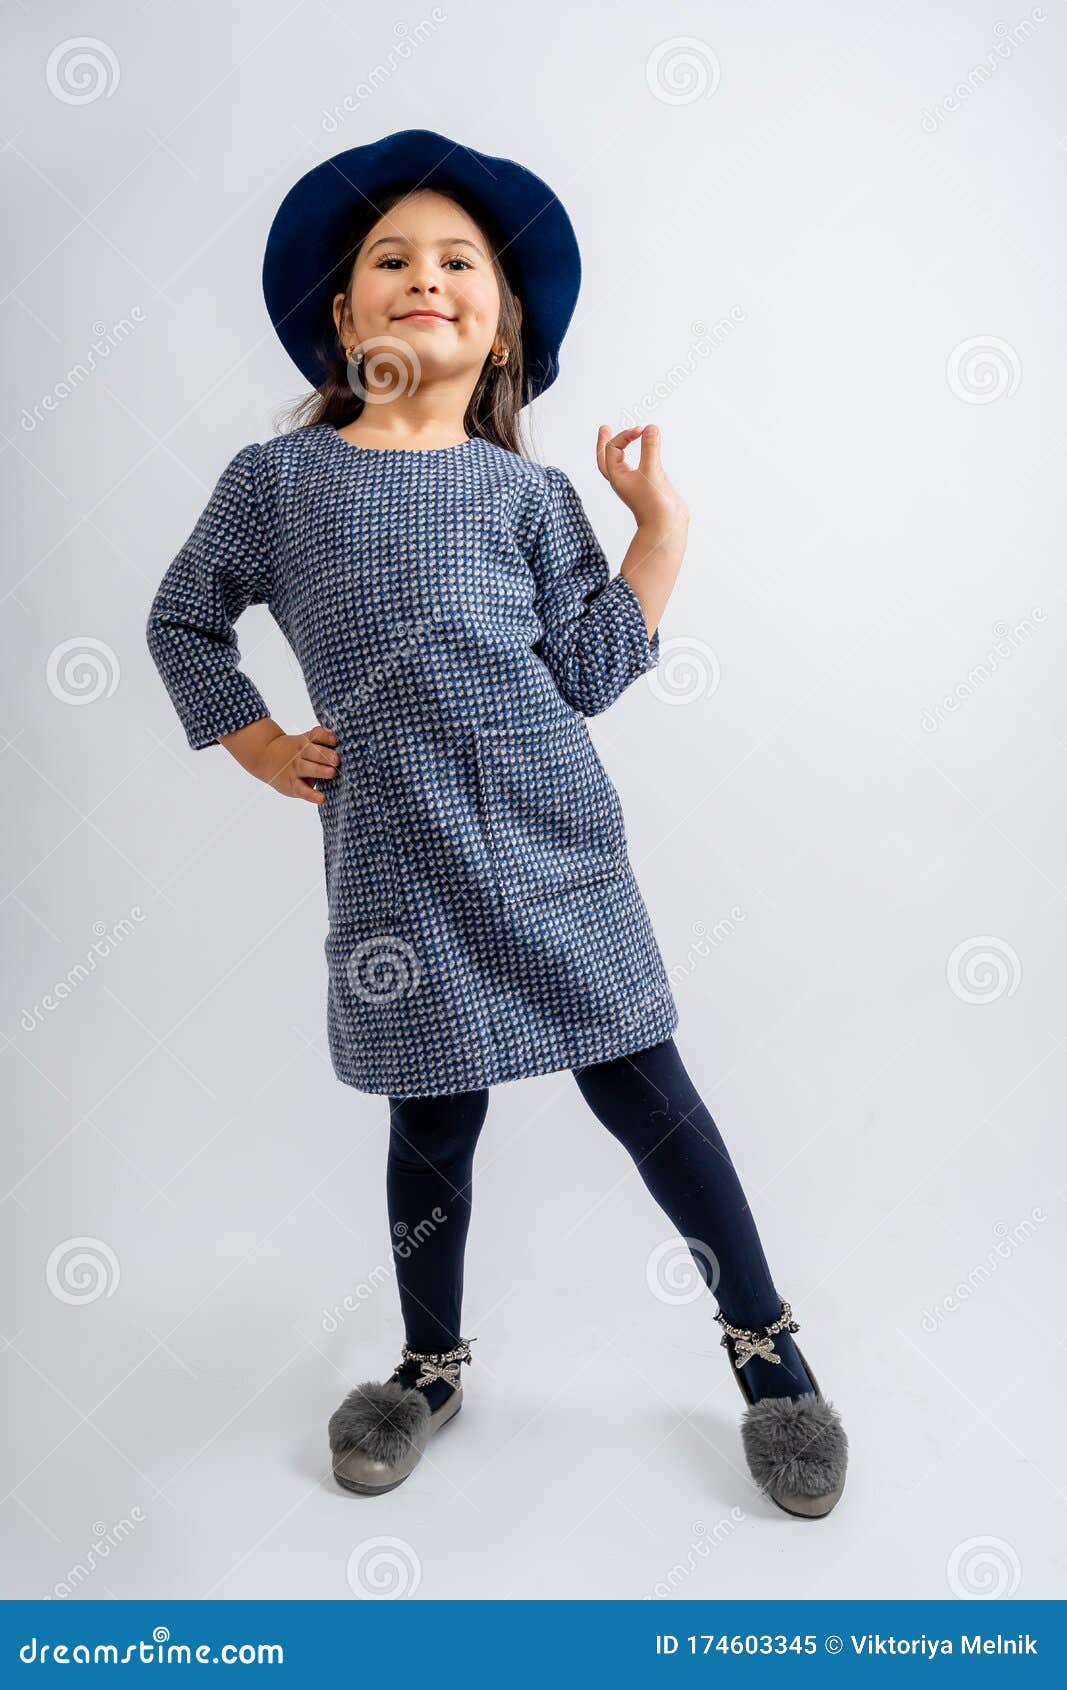 a child in a blue dress with white and black spots, a blue hat, blue tights and gray shoes  on a white background.